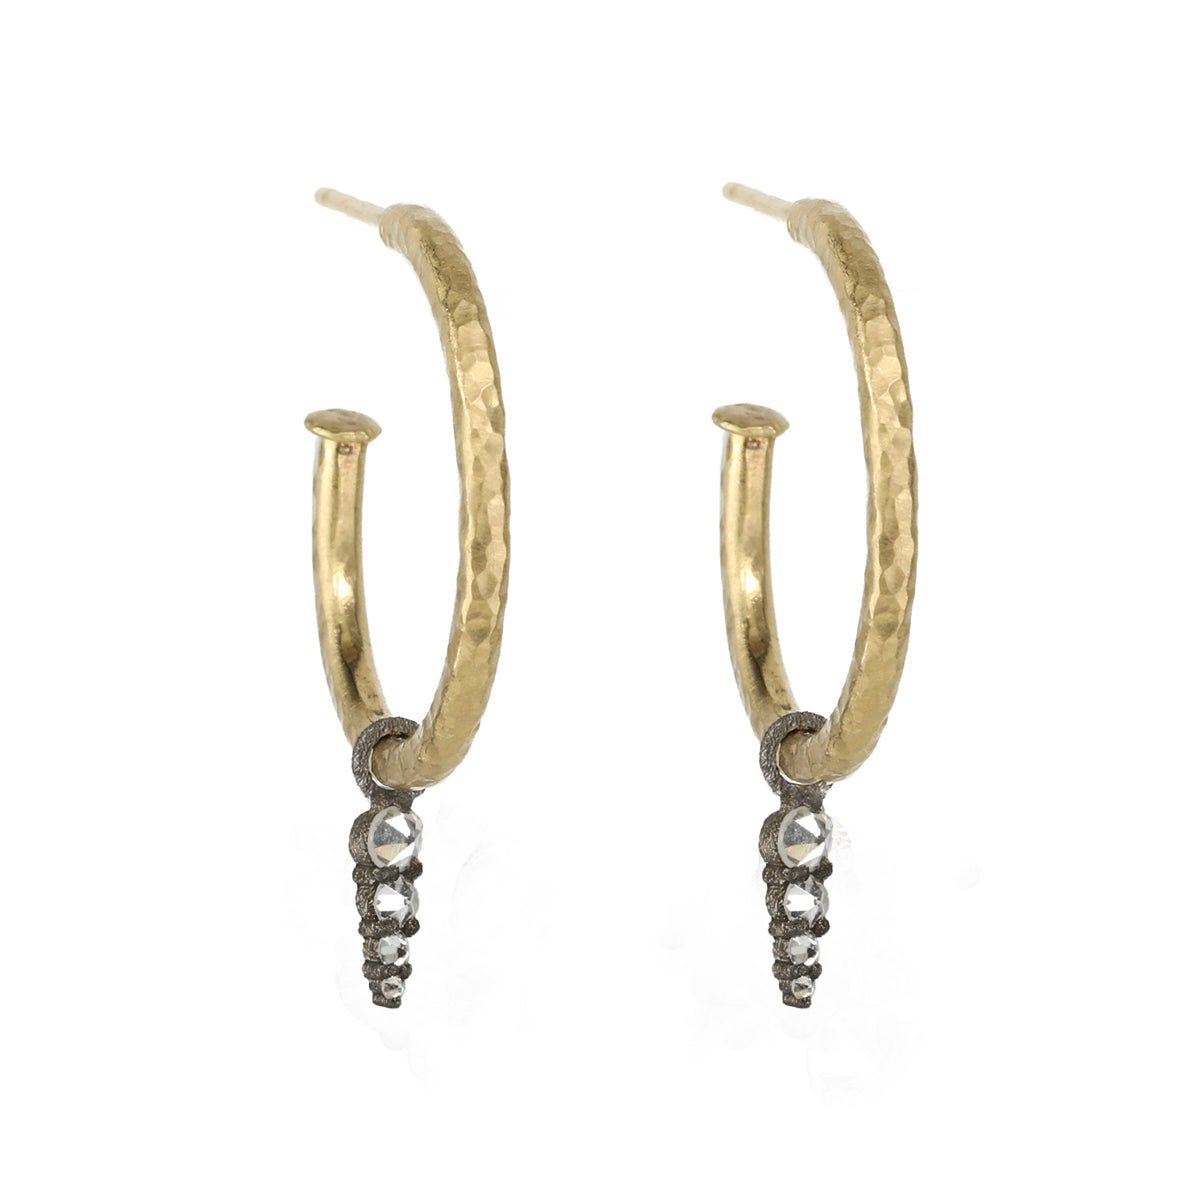 18 Karat Gold Large Hammered Hoop Earrings - Peridot Fine Jewelry - TAP by Todd Pownell